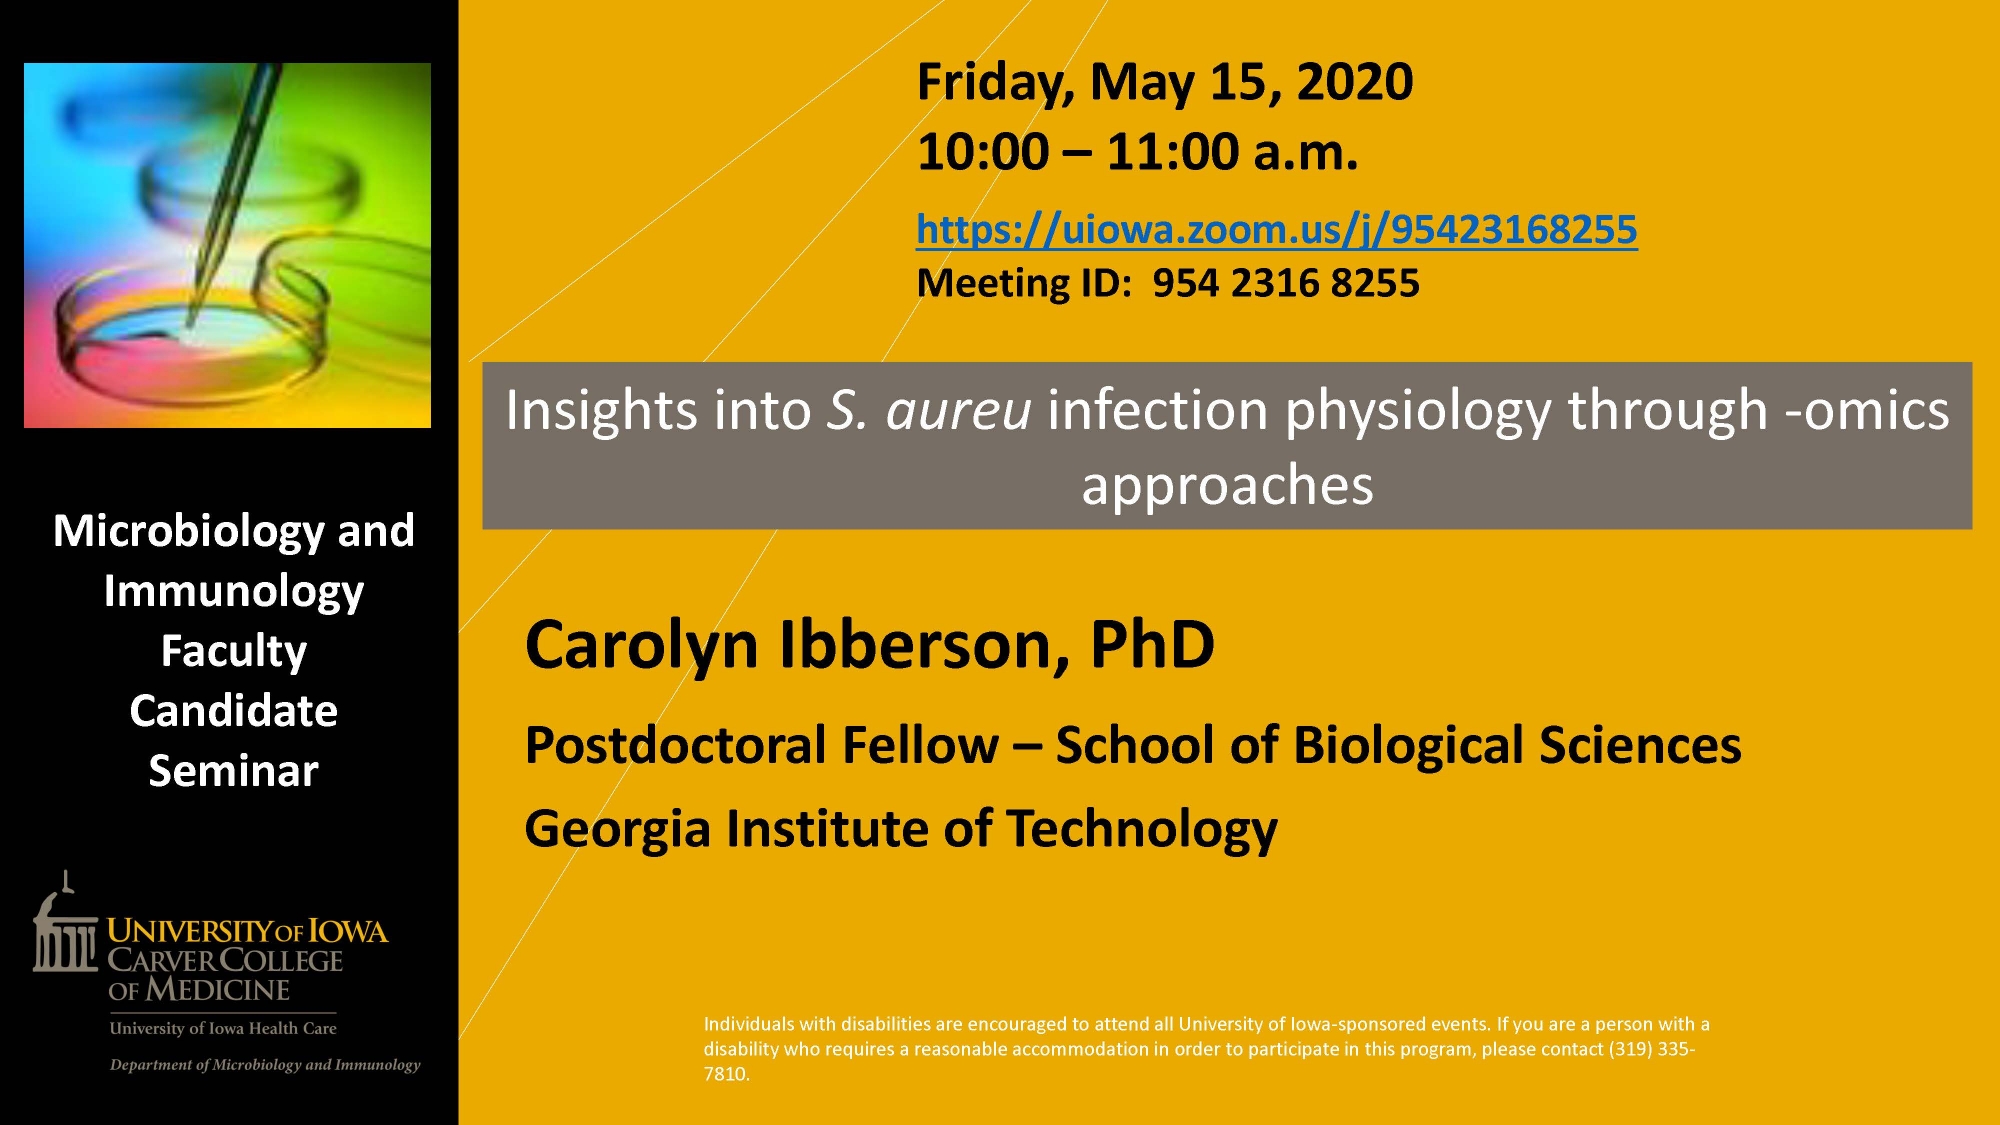 Faculty Candidate - Carolyn Ibberson